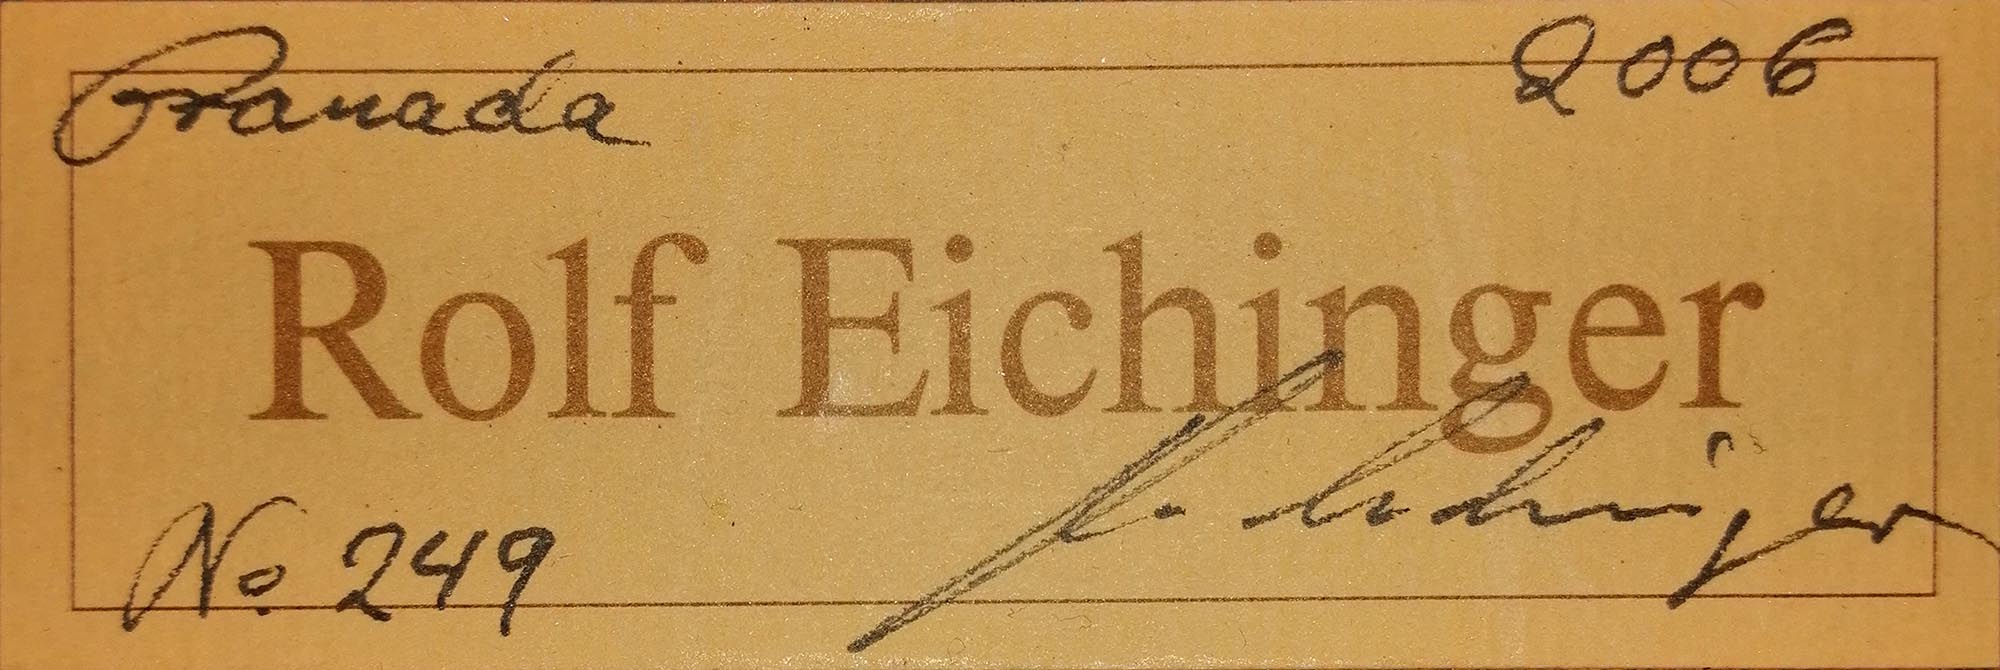 a rolfeichinger no249 2006 02022019 label